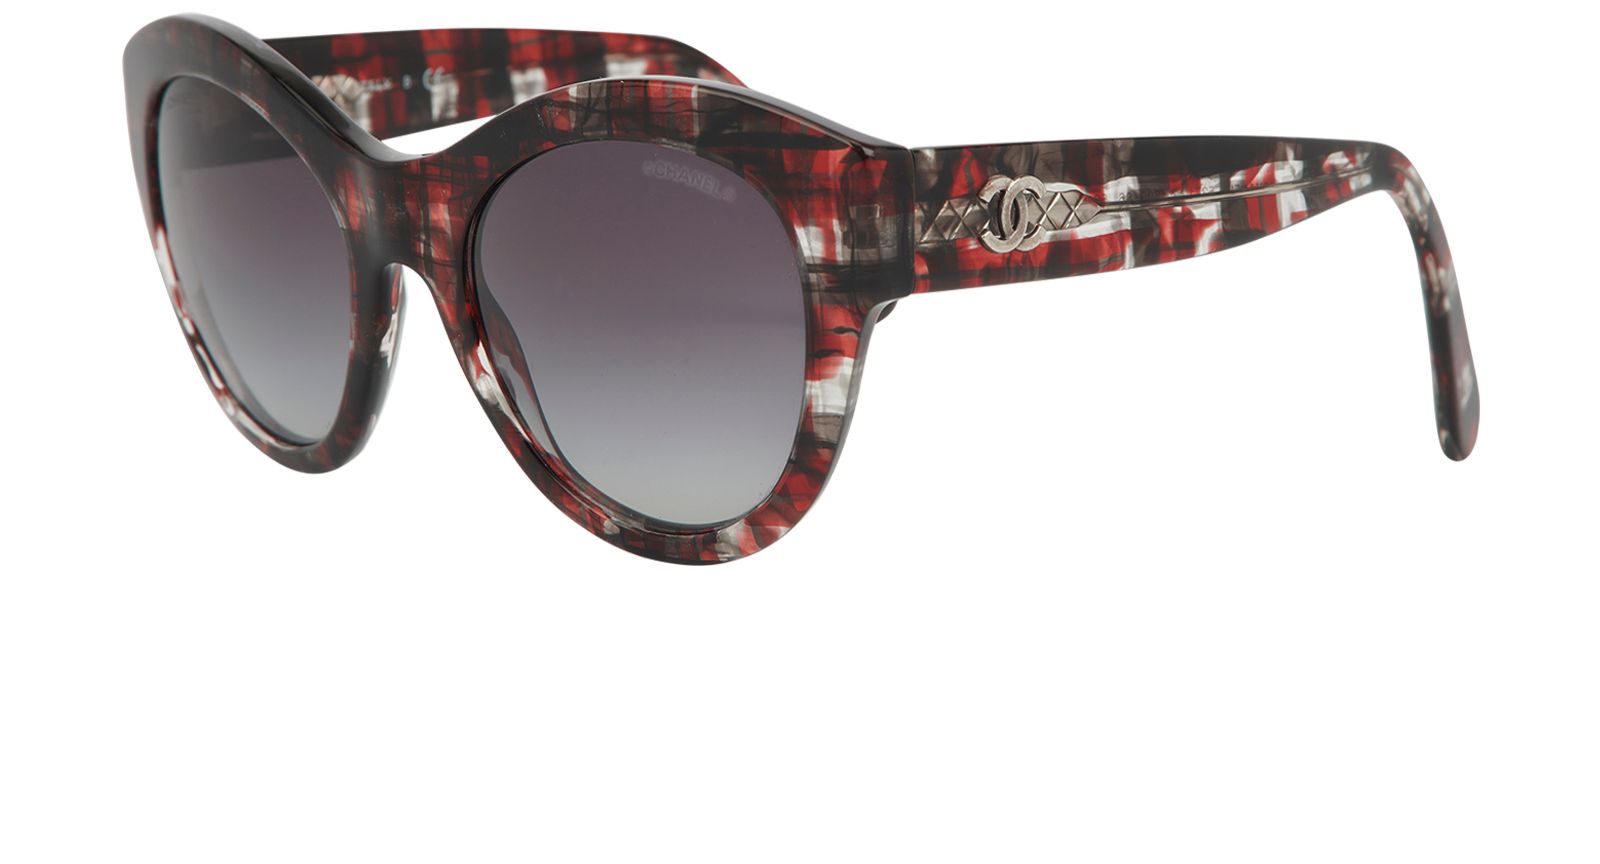 Chanel 5371 Butterfly Sunglasses